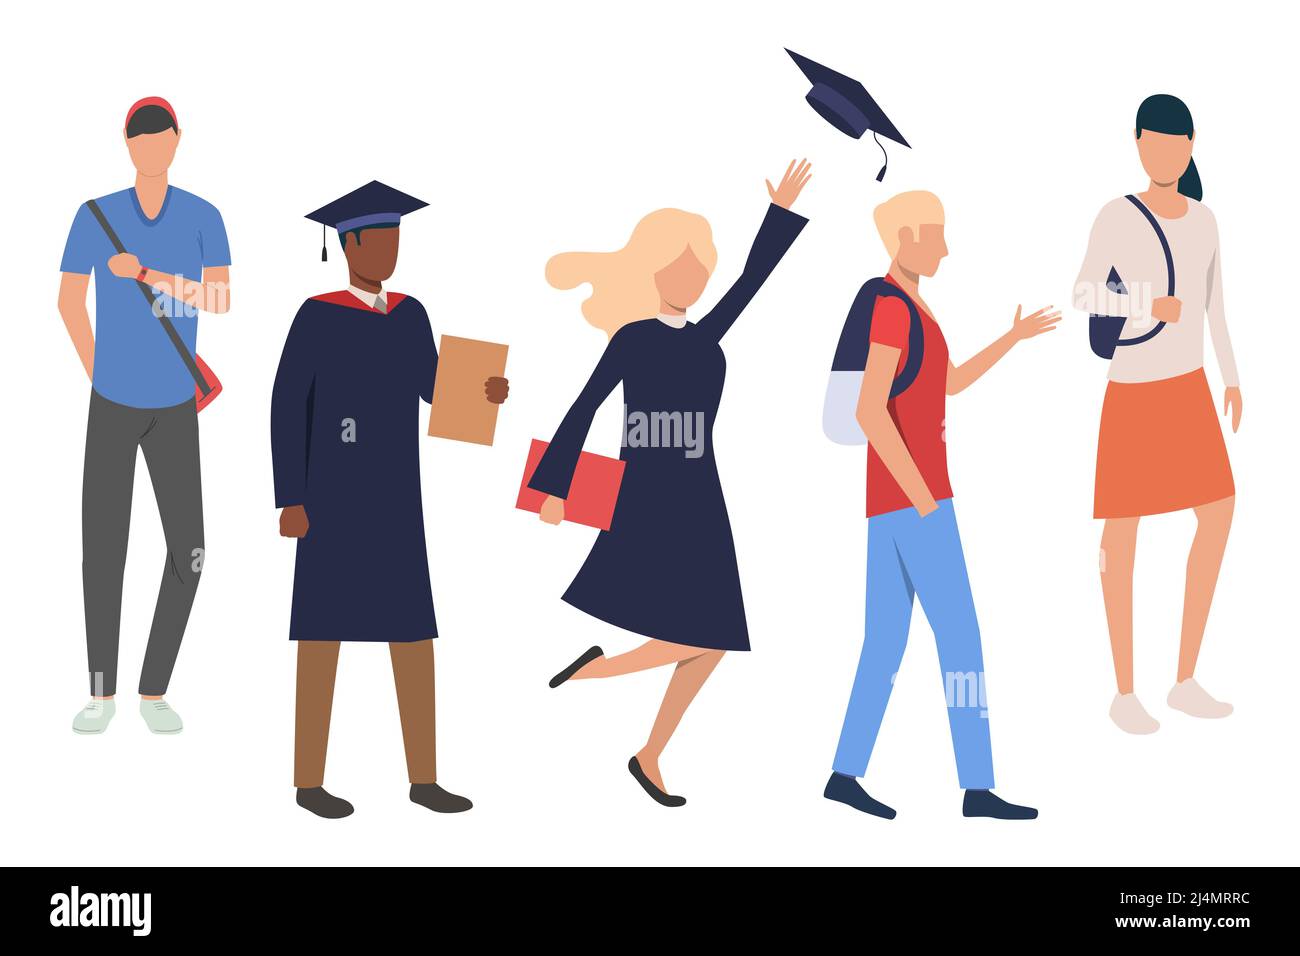 Collection of students celebrating graduation. Flat cartoon characters getting degree. Vector illustration can be used for leaflet, presentation, adve Stock Vector